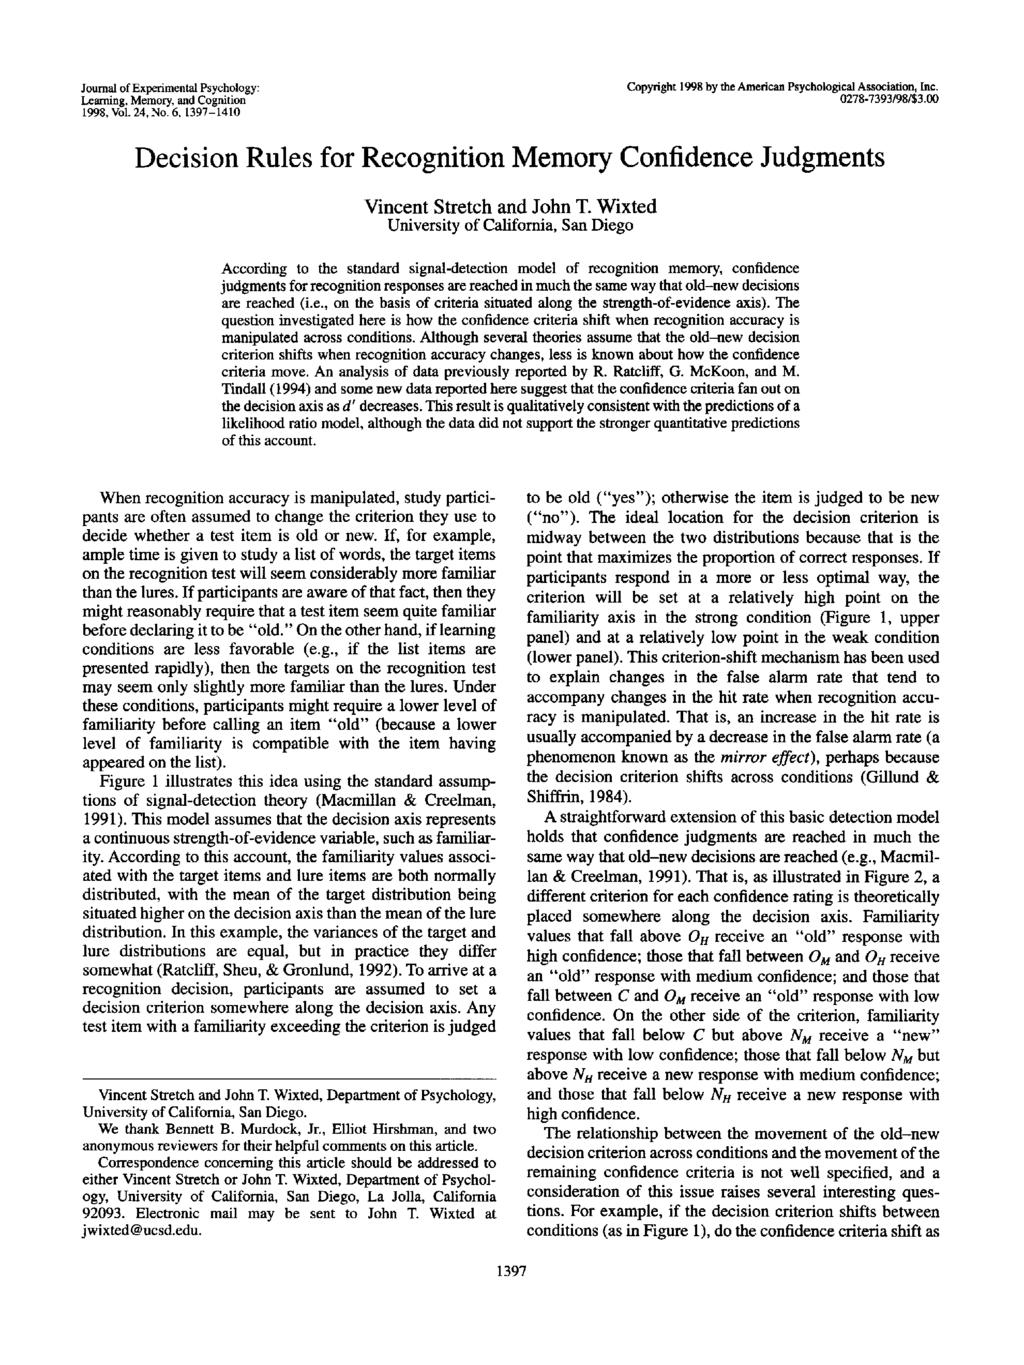 Journal of Experimental Psychology: Learning, Memory, and Cognition 1998, Vol. 24, No. 6, 1397-1410 Copyright 1998 by the American Psychological Association, Inc. 0278-7393/98/S3.